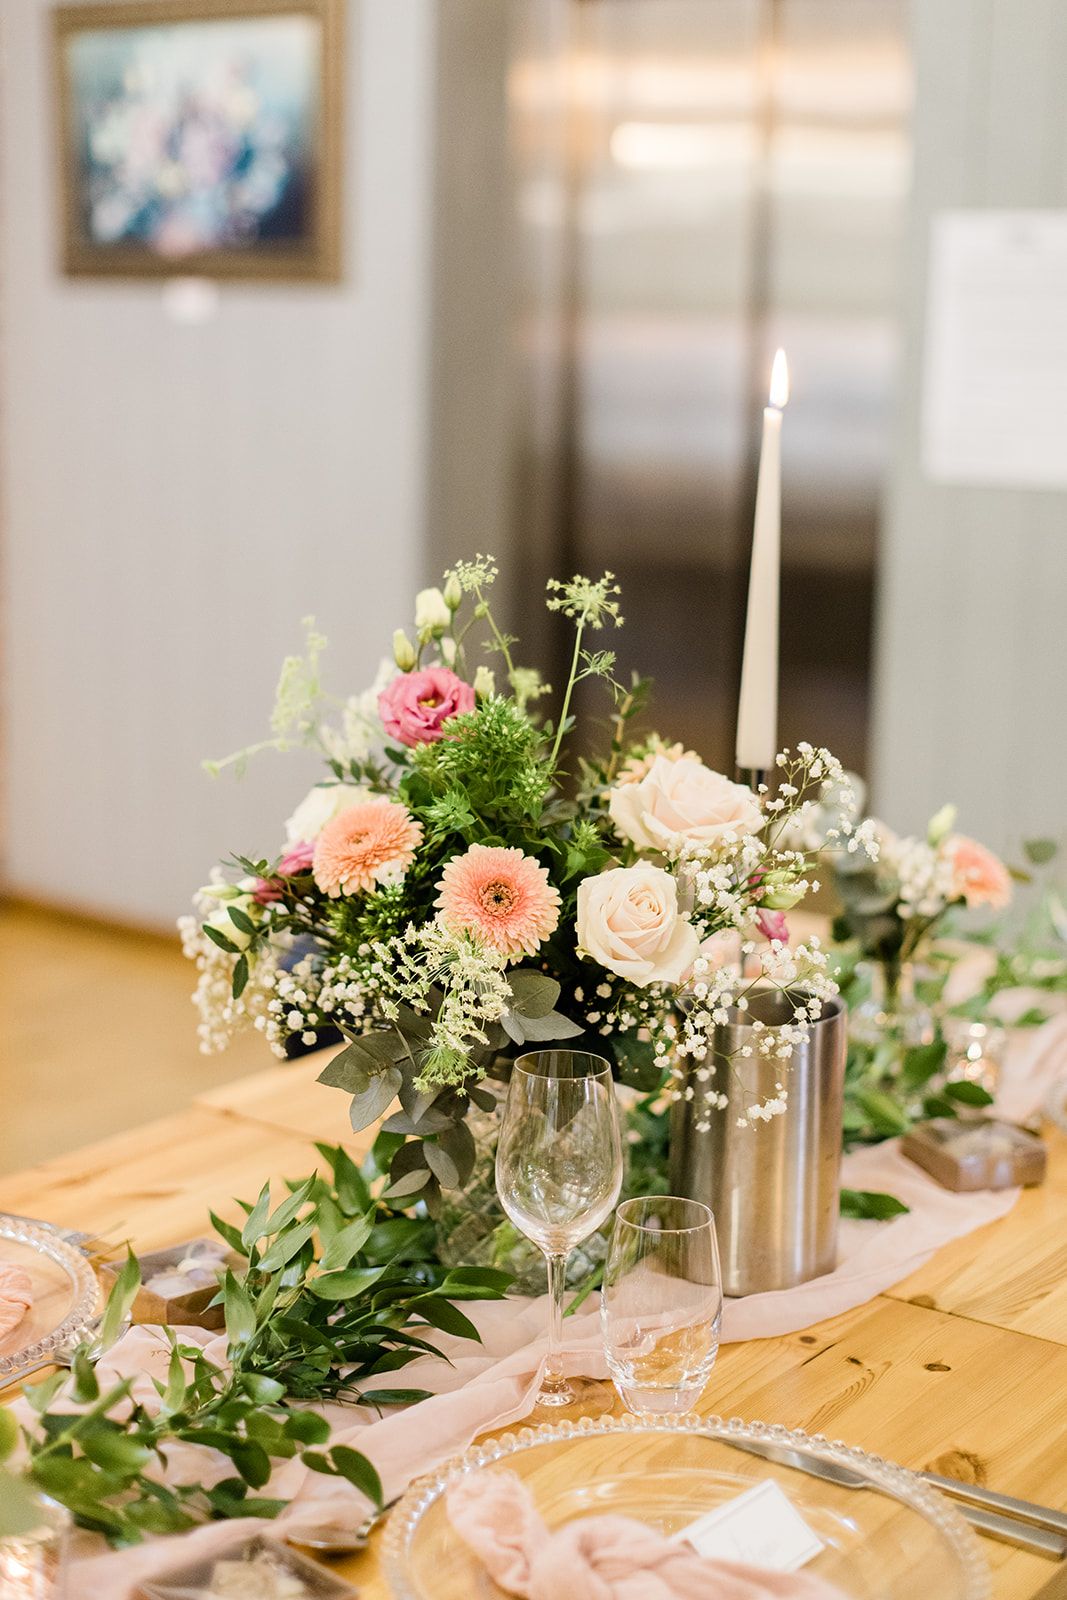 Styling by The Artisan Wedding House